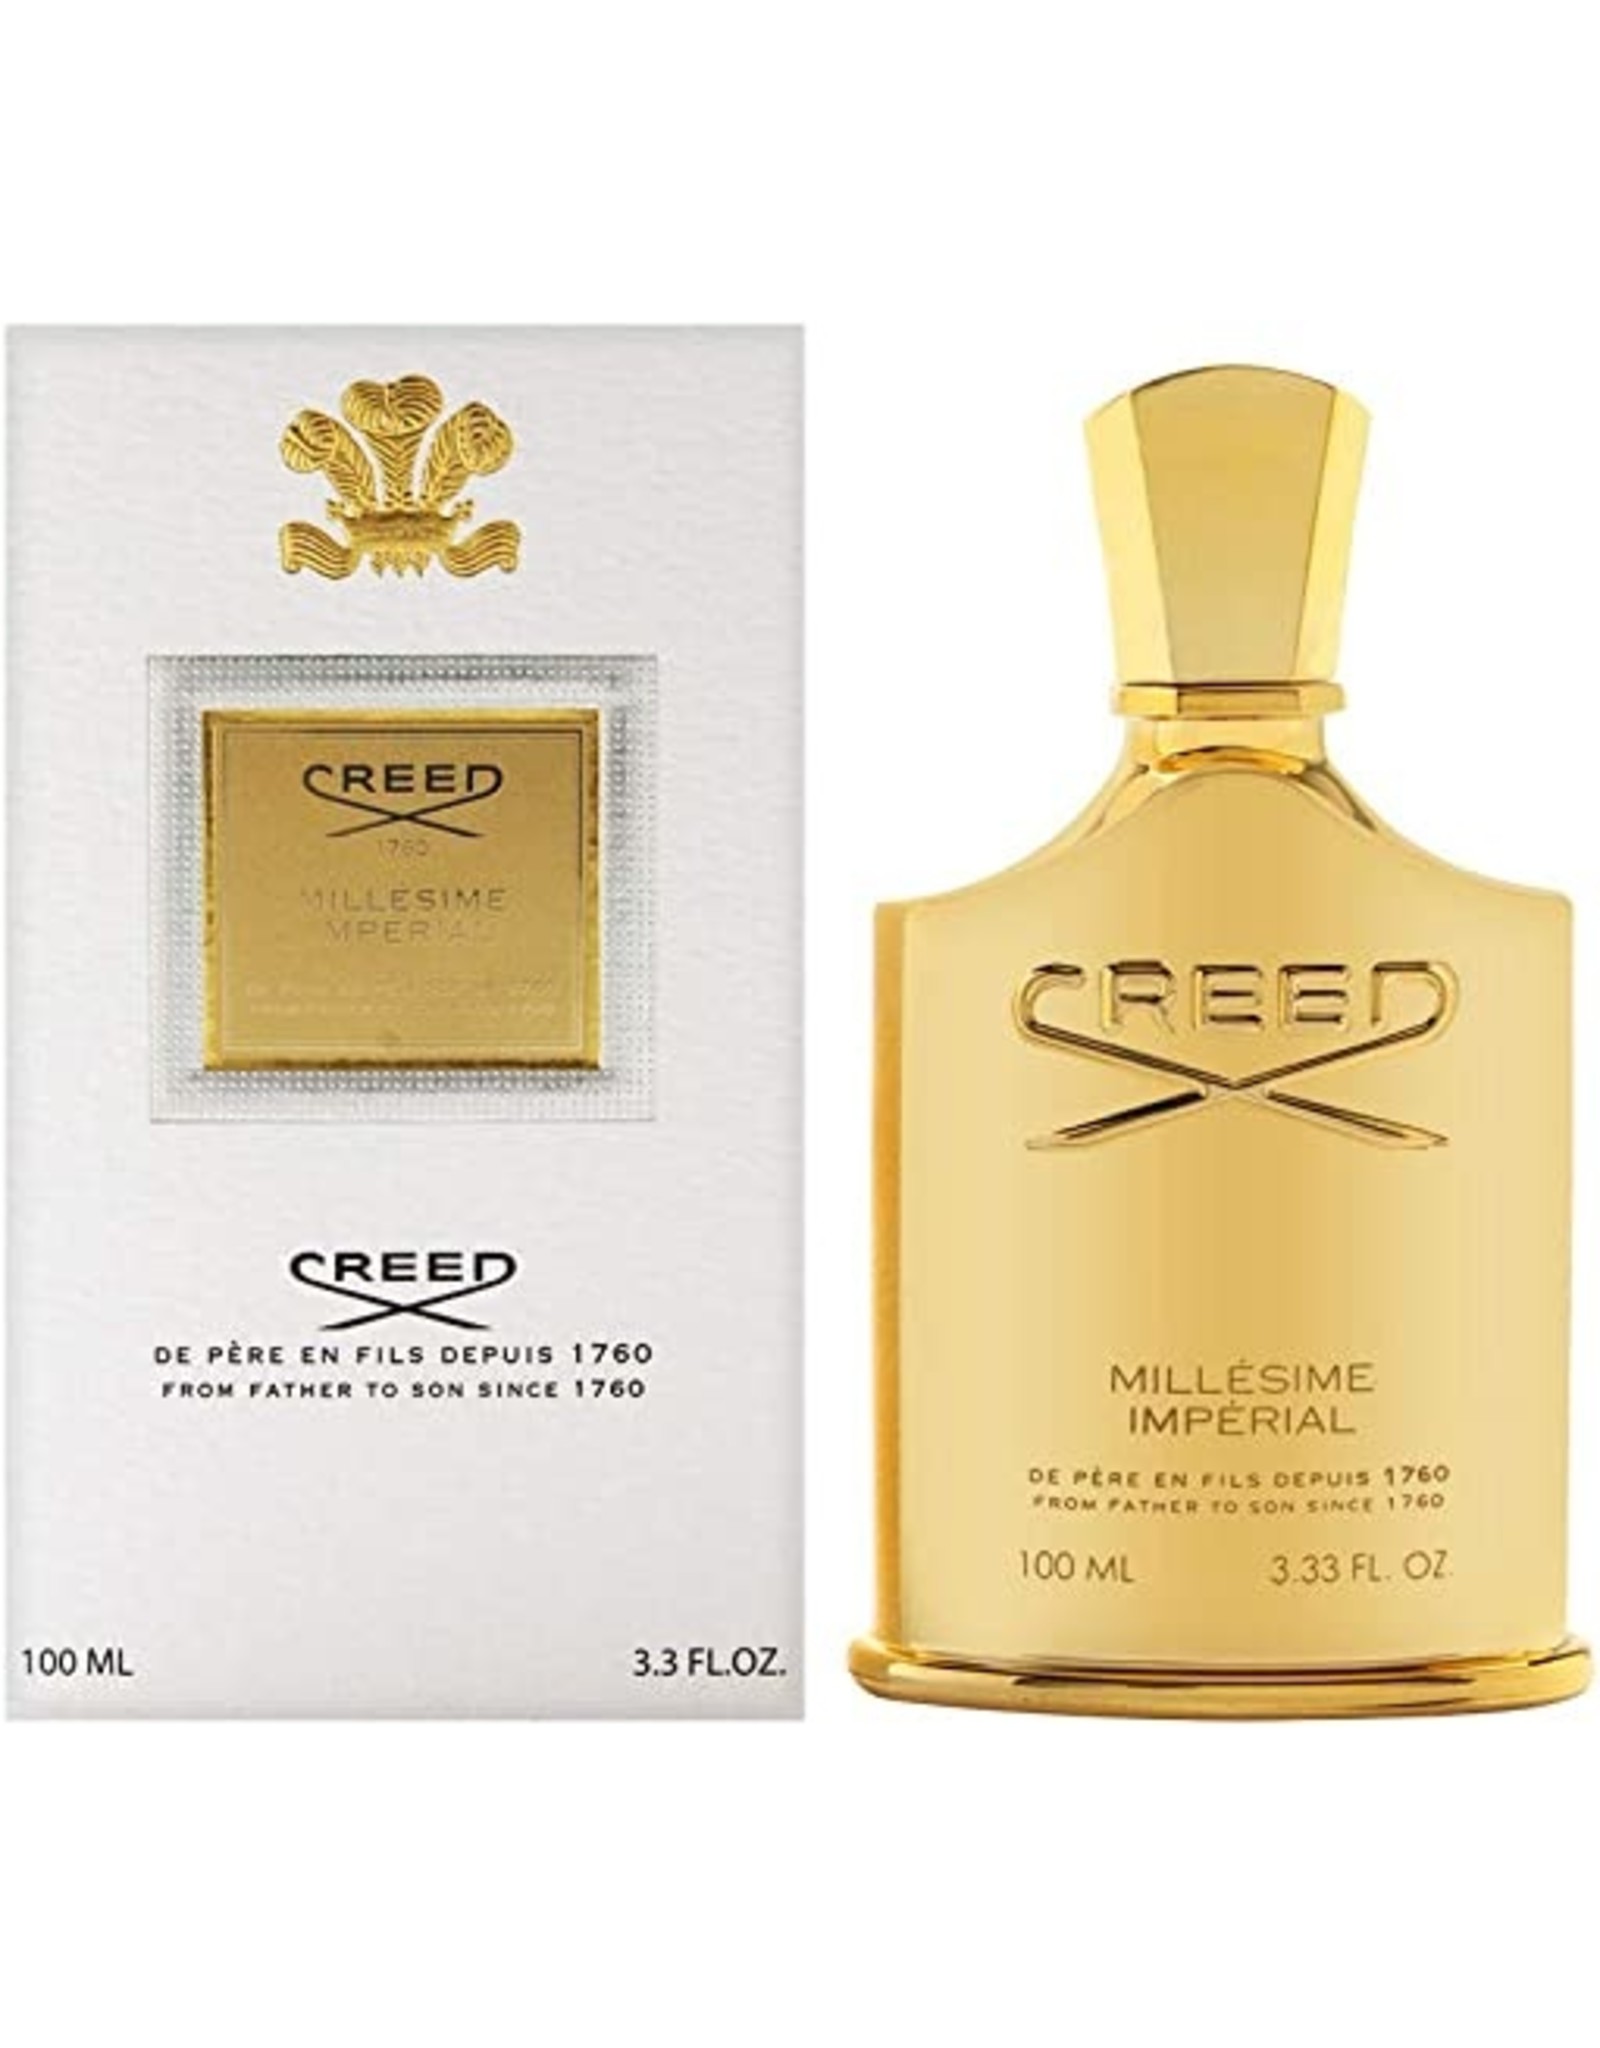 CREED CREED MILLESIME IMPERIAL